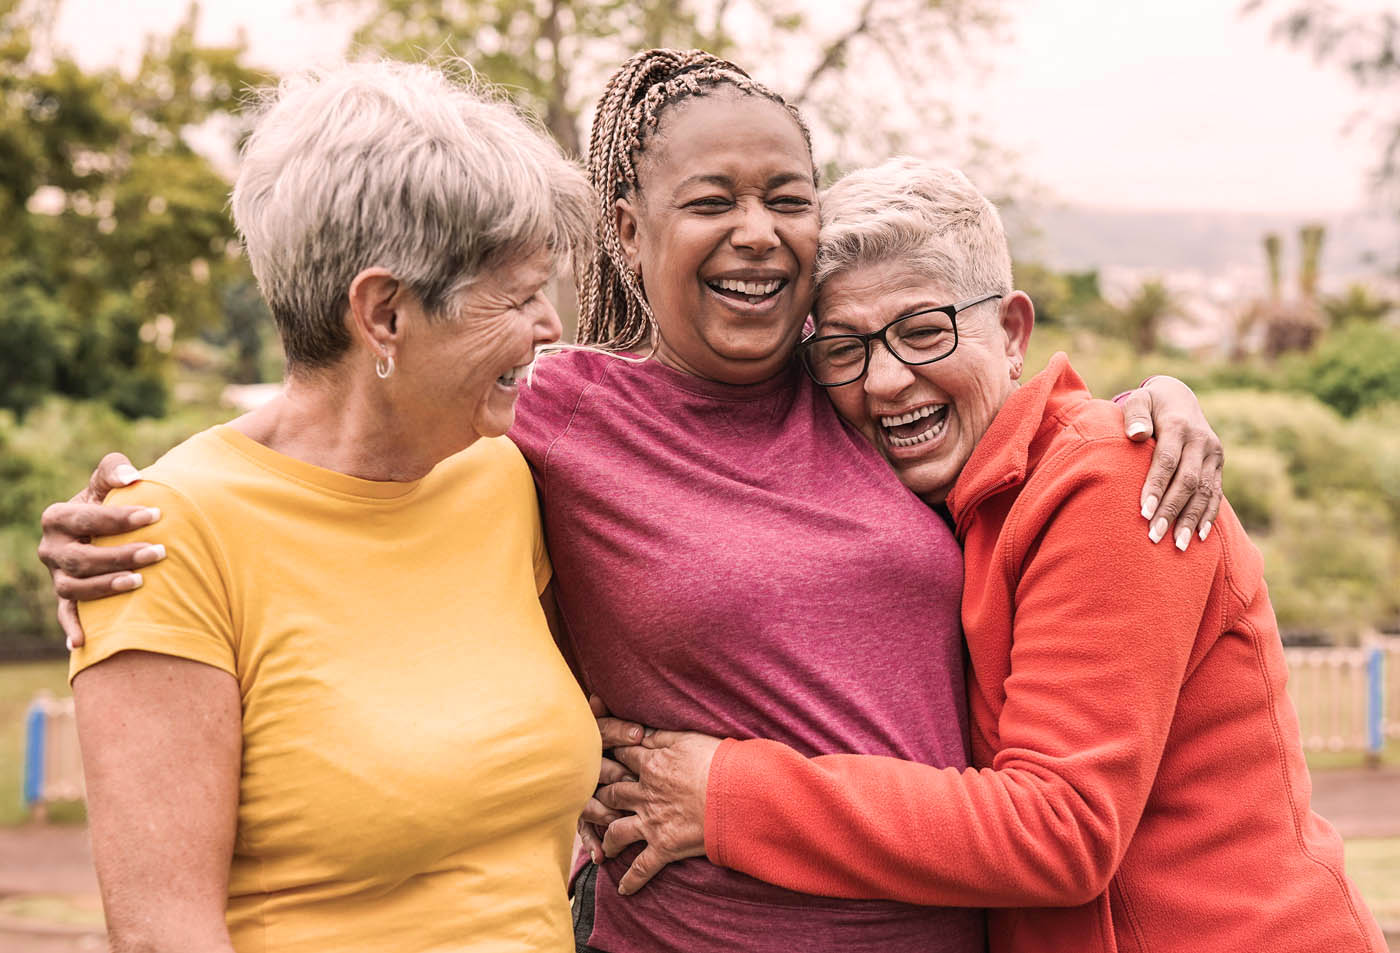 A group of elderly women laughing and hugging each other - discover Holland multiple sclerosis pain treatment today.